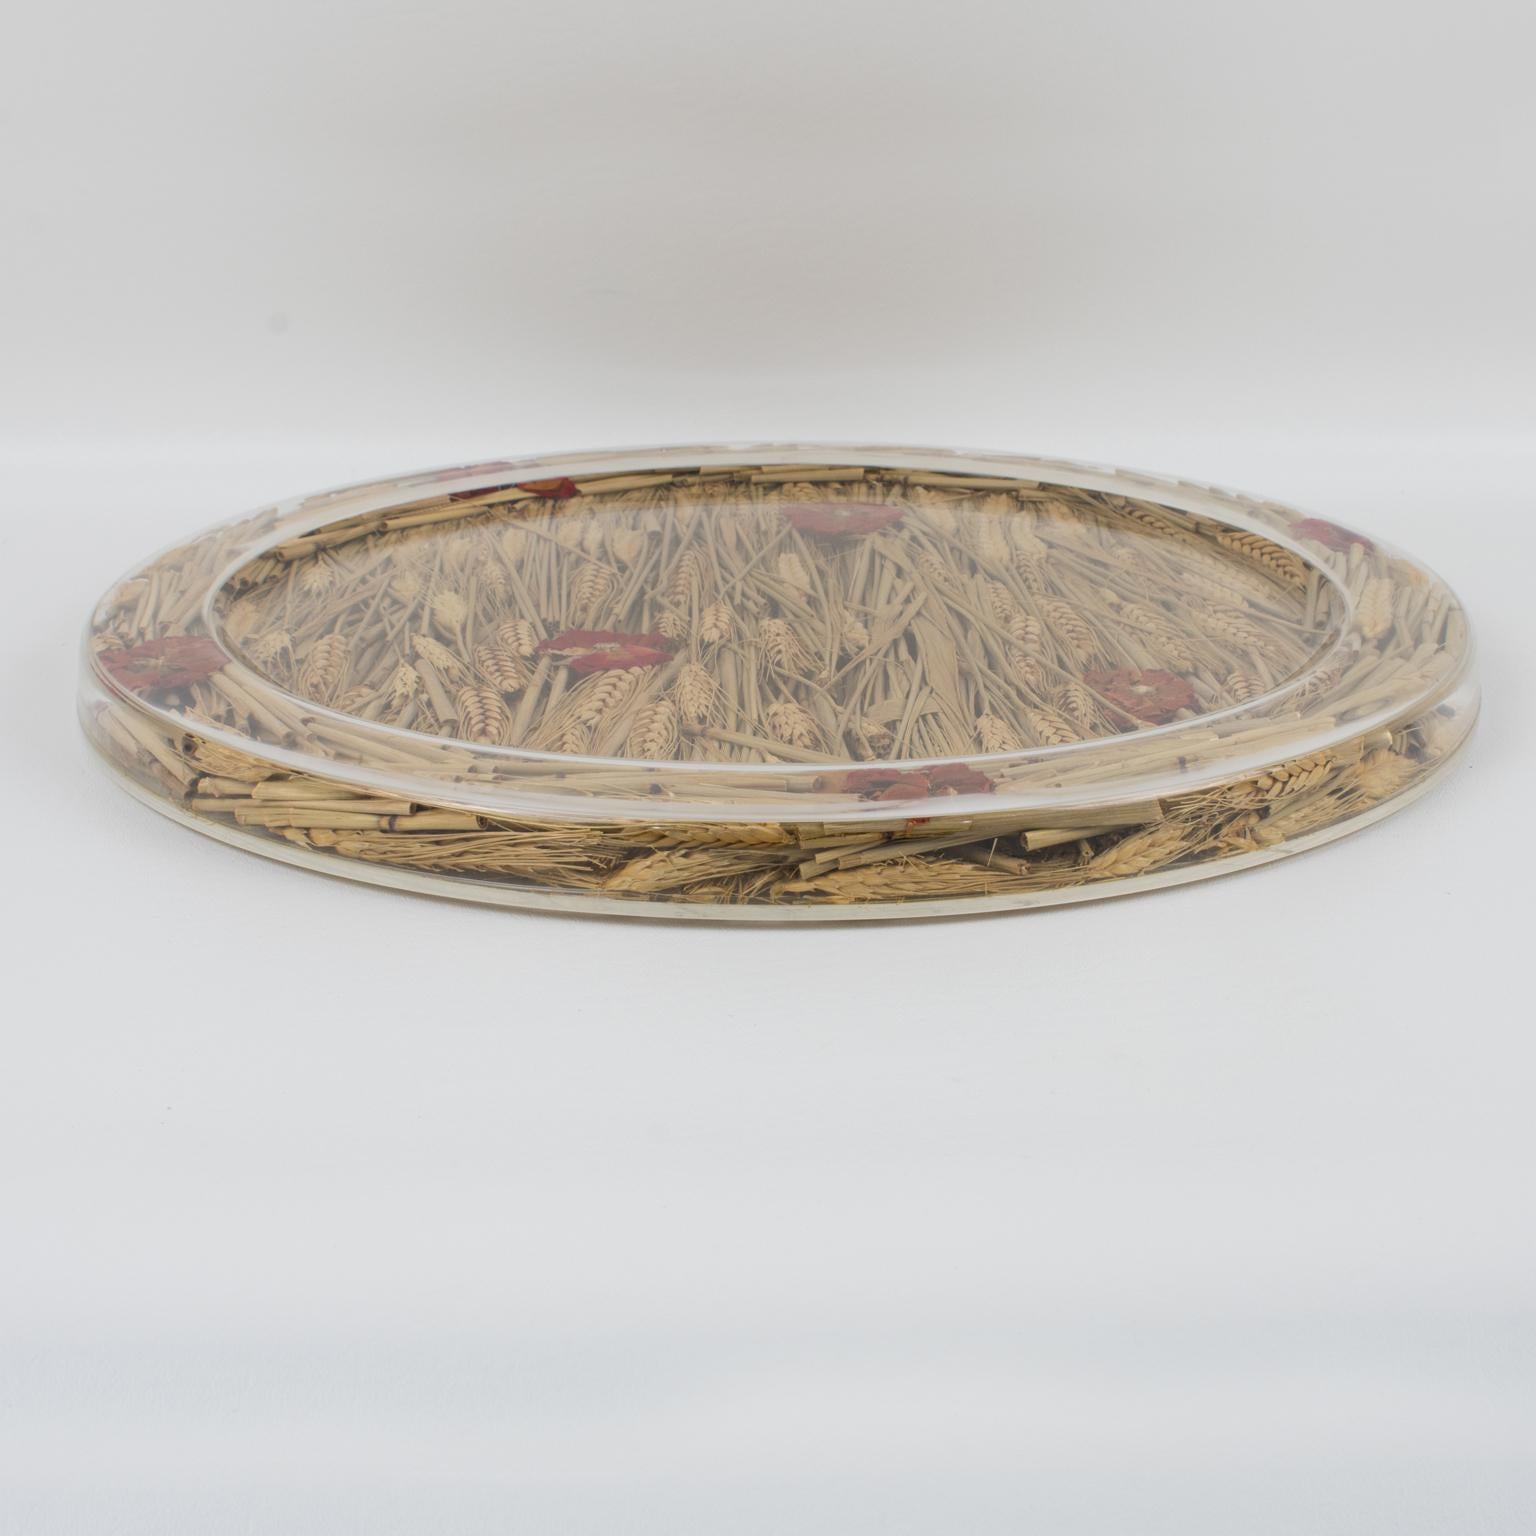 French Christian Dior Tray Board Platter Lucite, Wheat and Dried Flowers. 1972